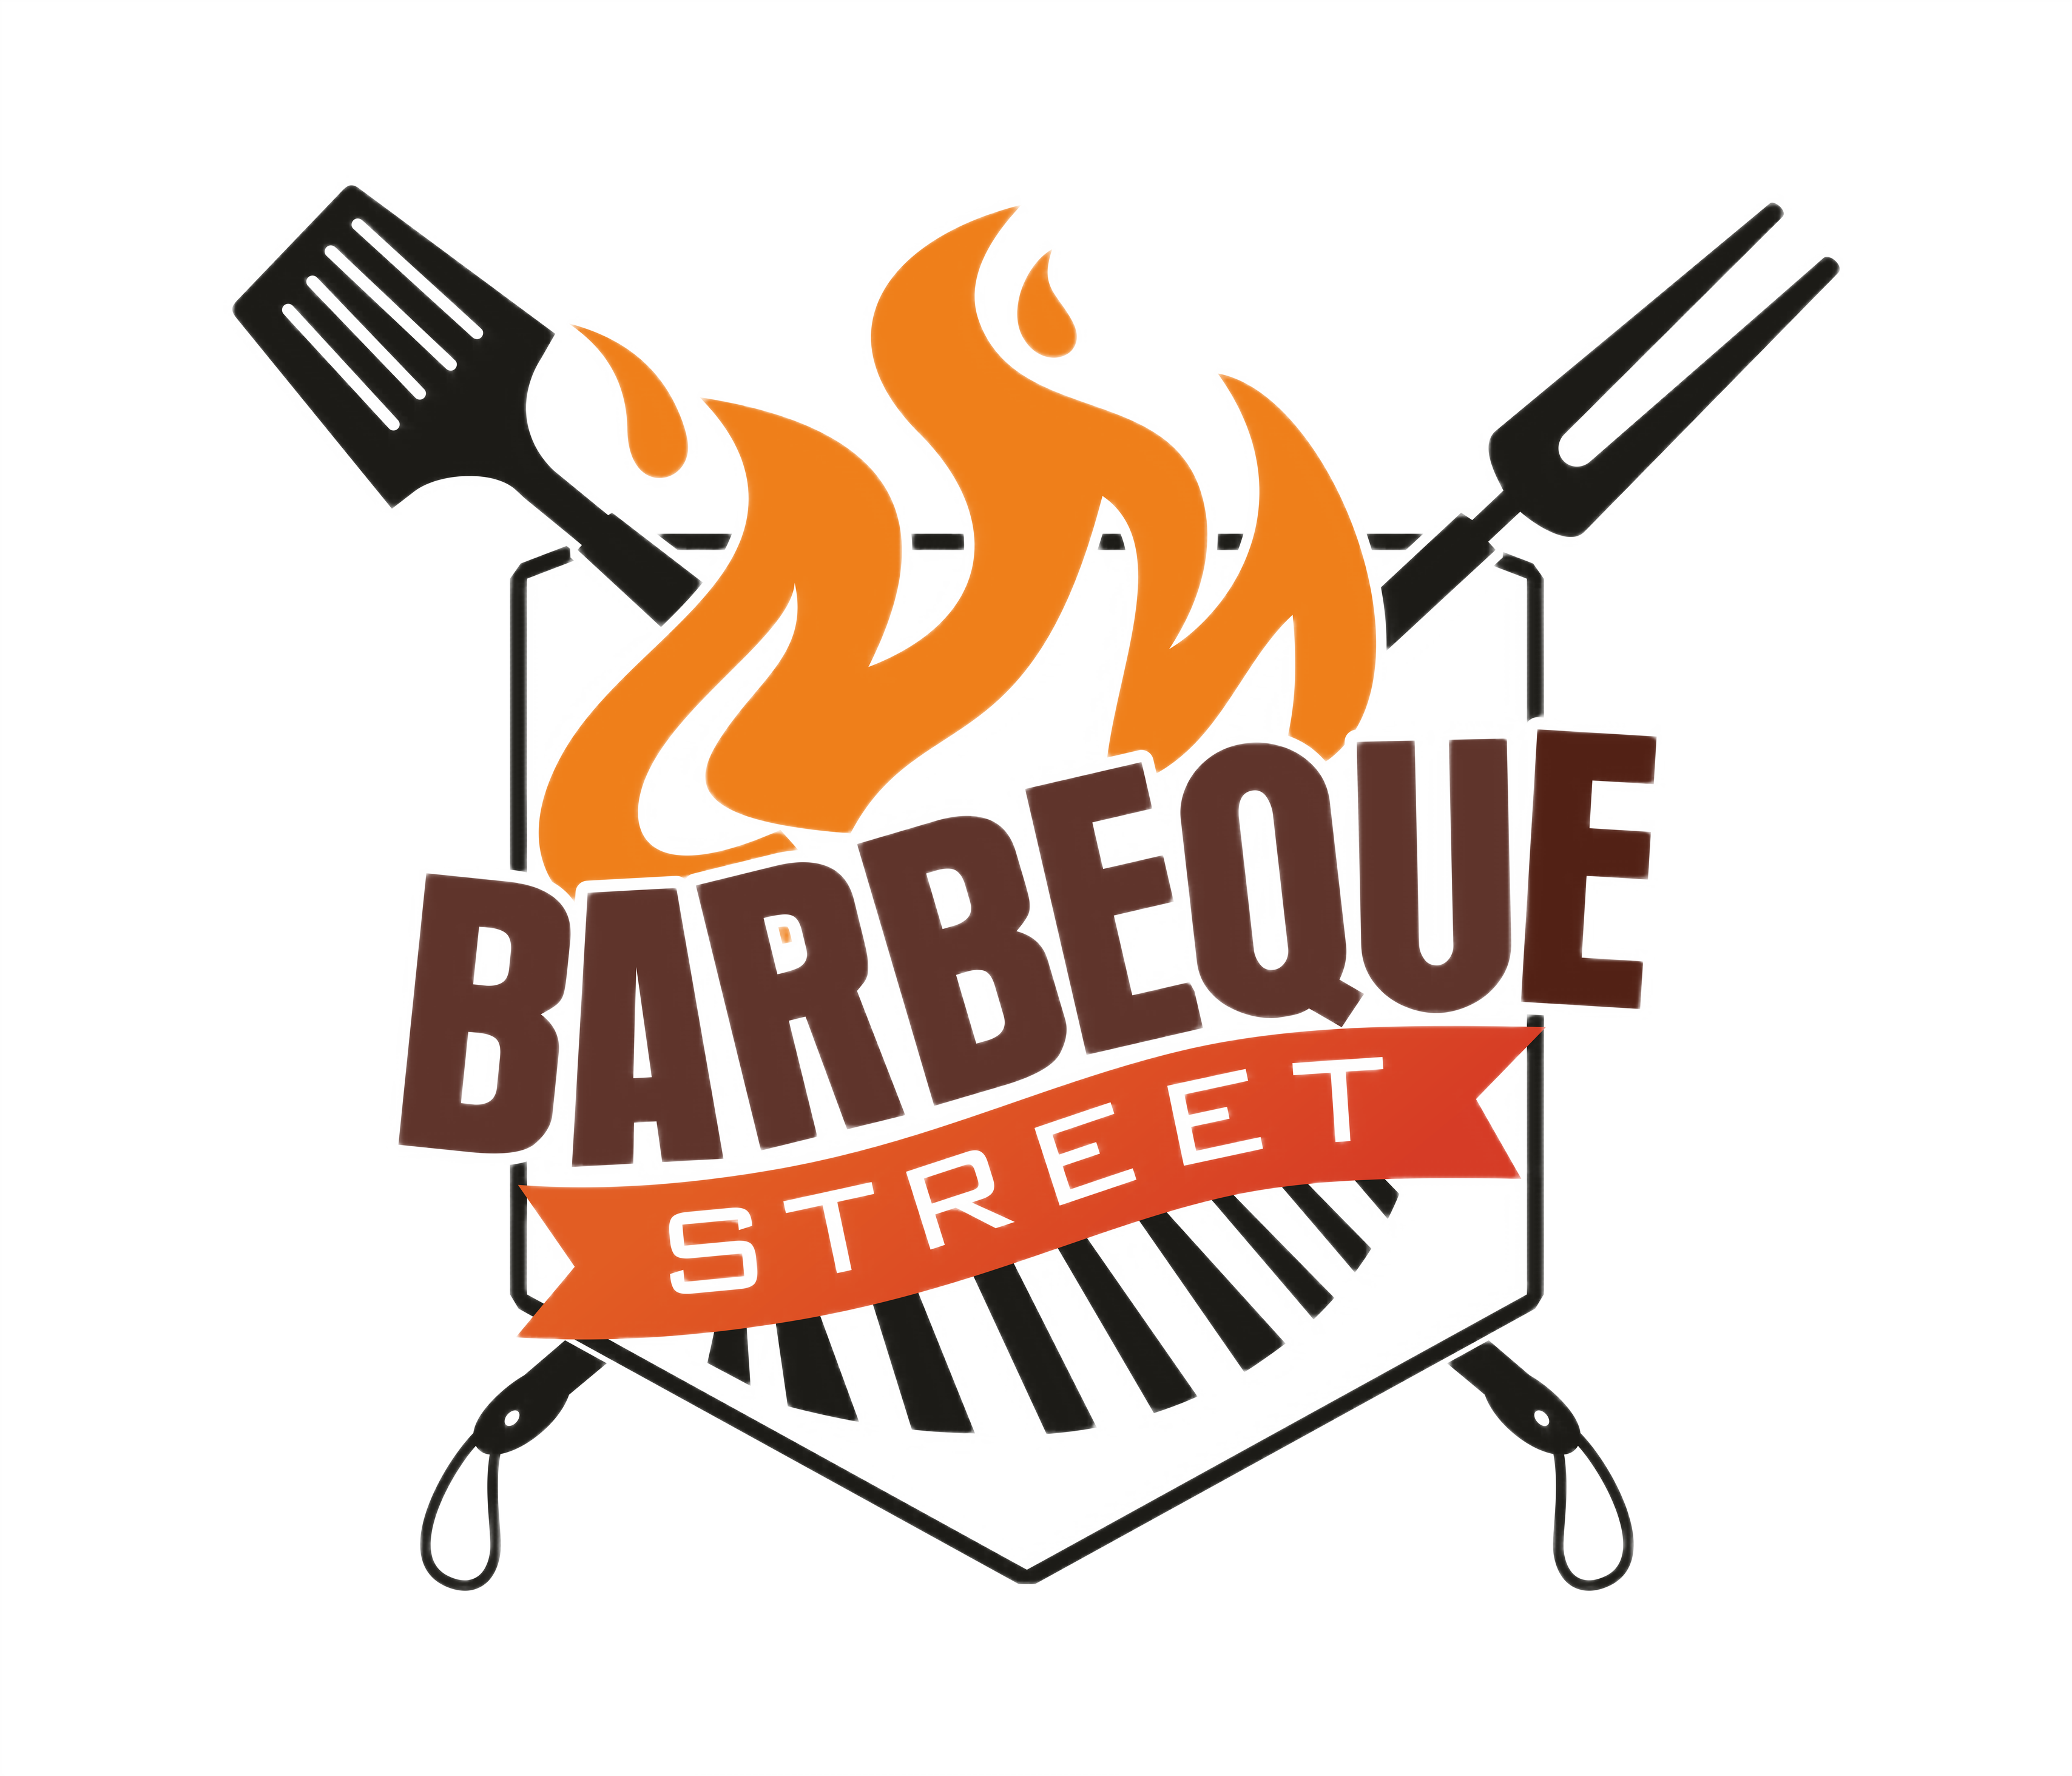 BarbeQue – Street